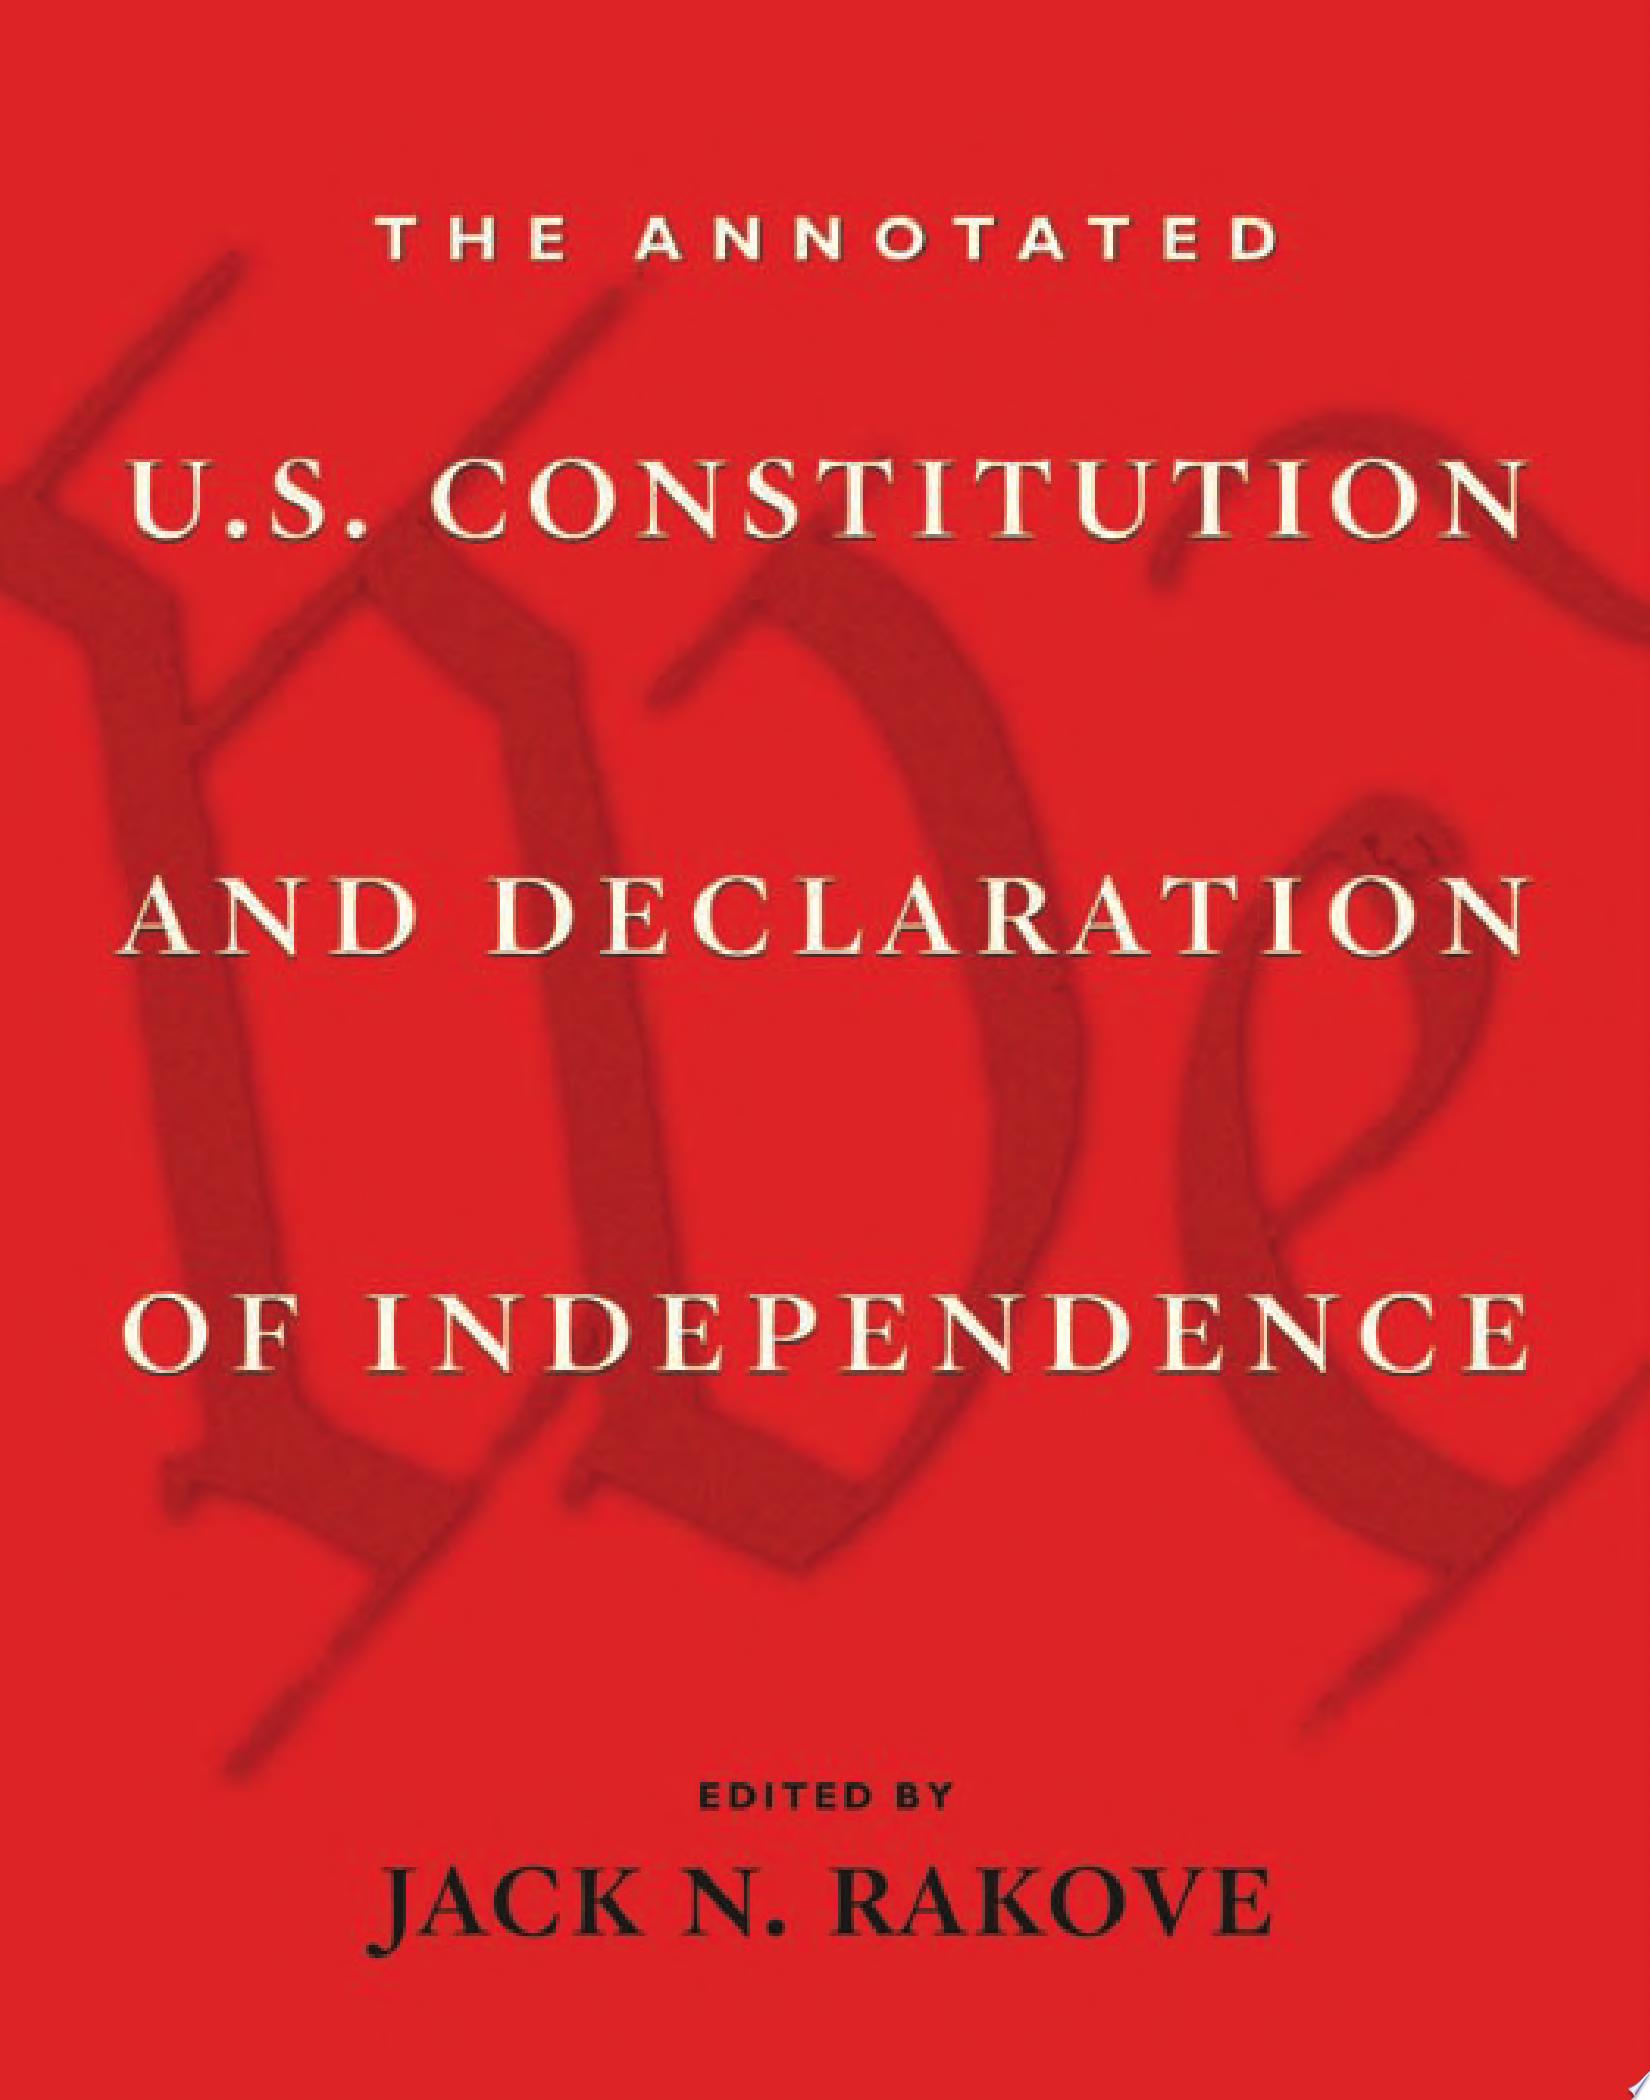 Image for "The Annotated U.S. Constitution and Declaration of Independence"